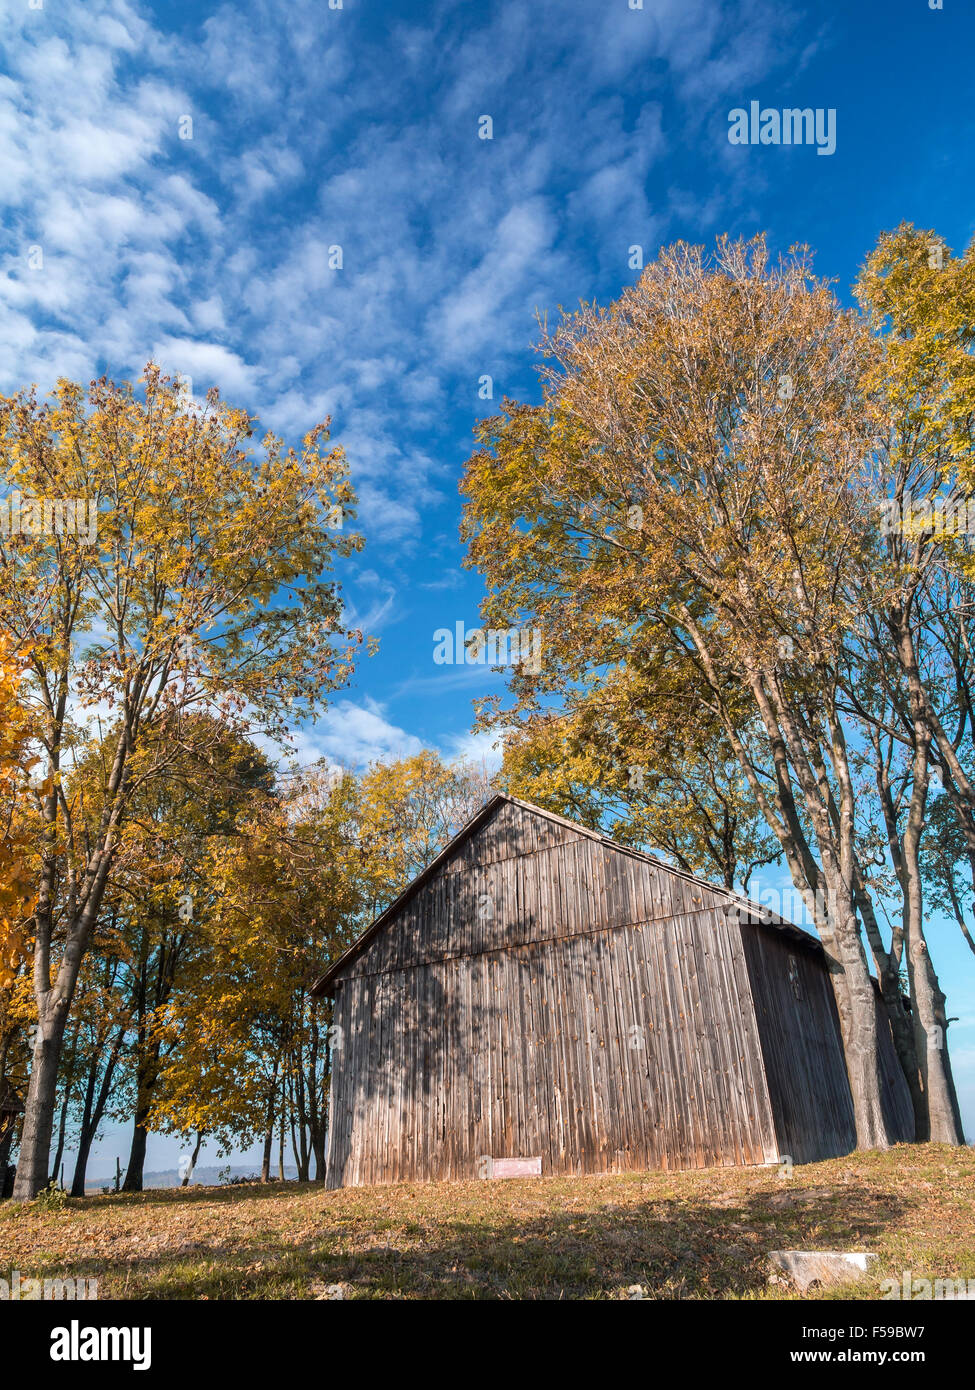 Old wooden barn surrounded by trees in fall colors Stock Photo